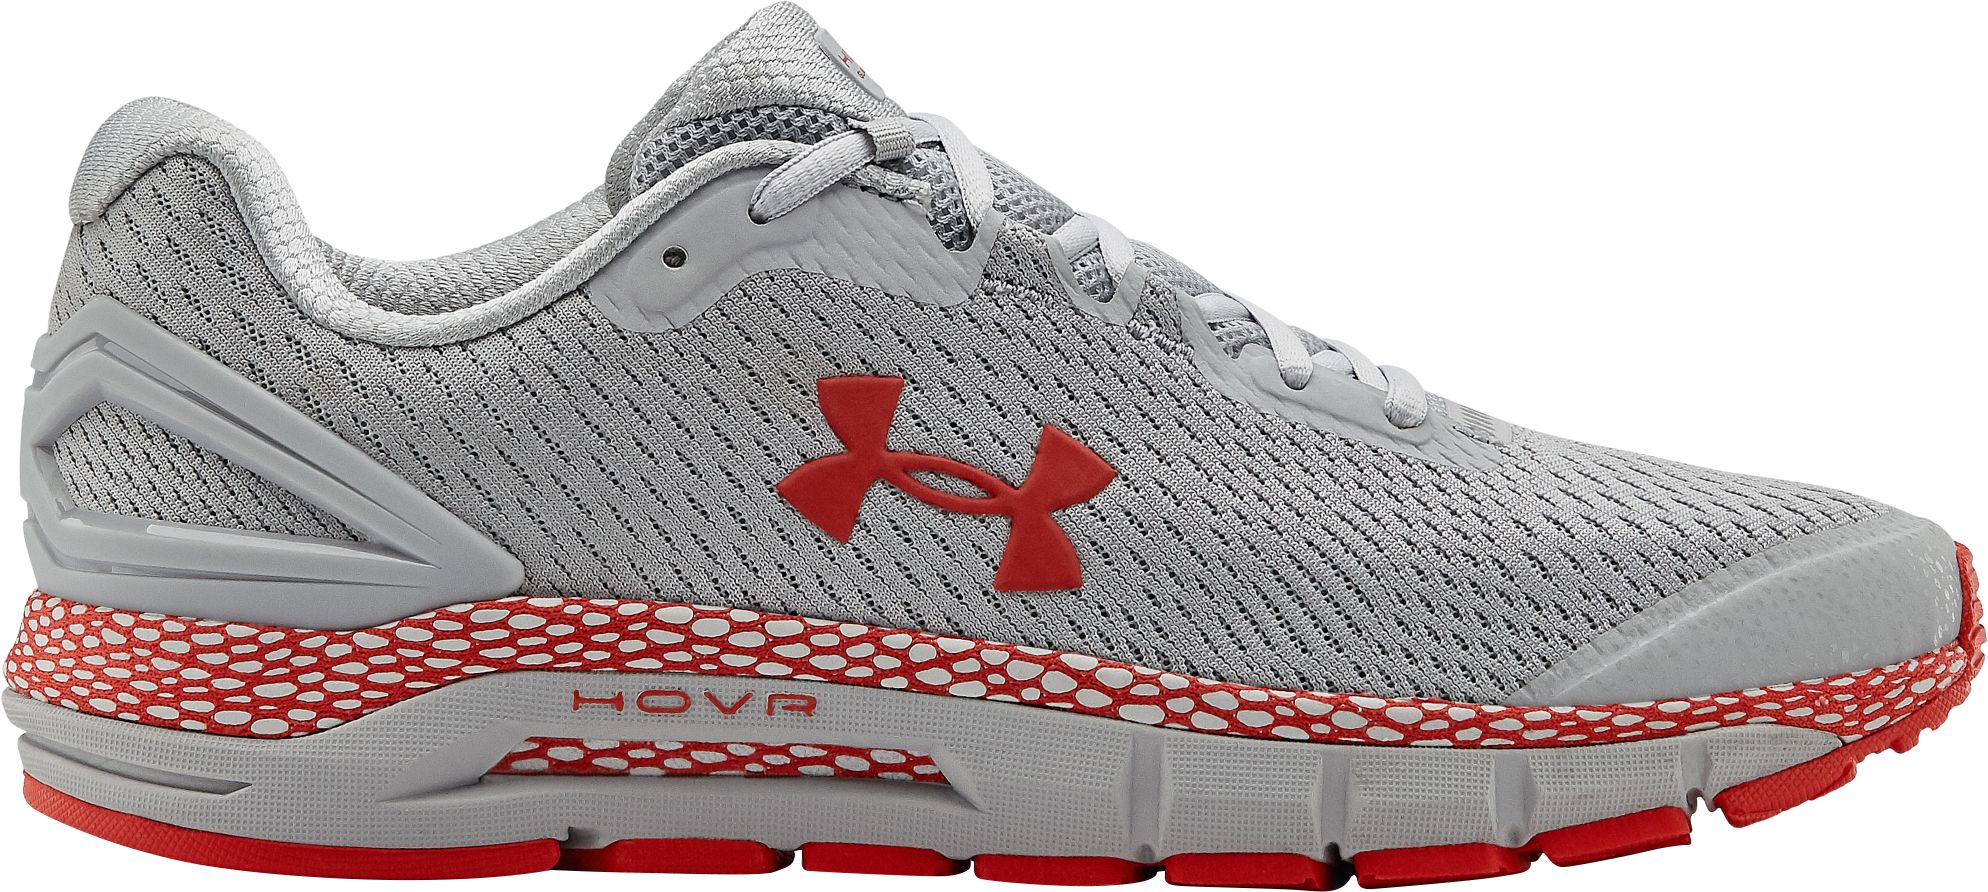 under armour gray running shoes